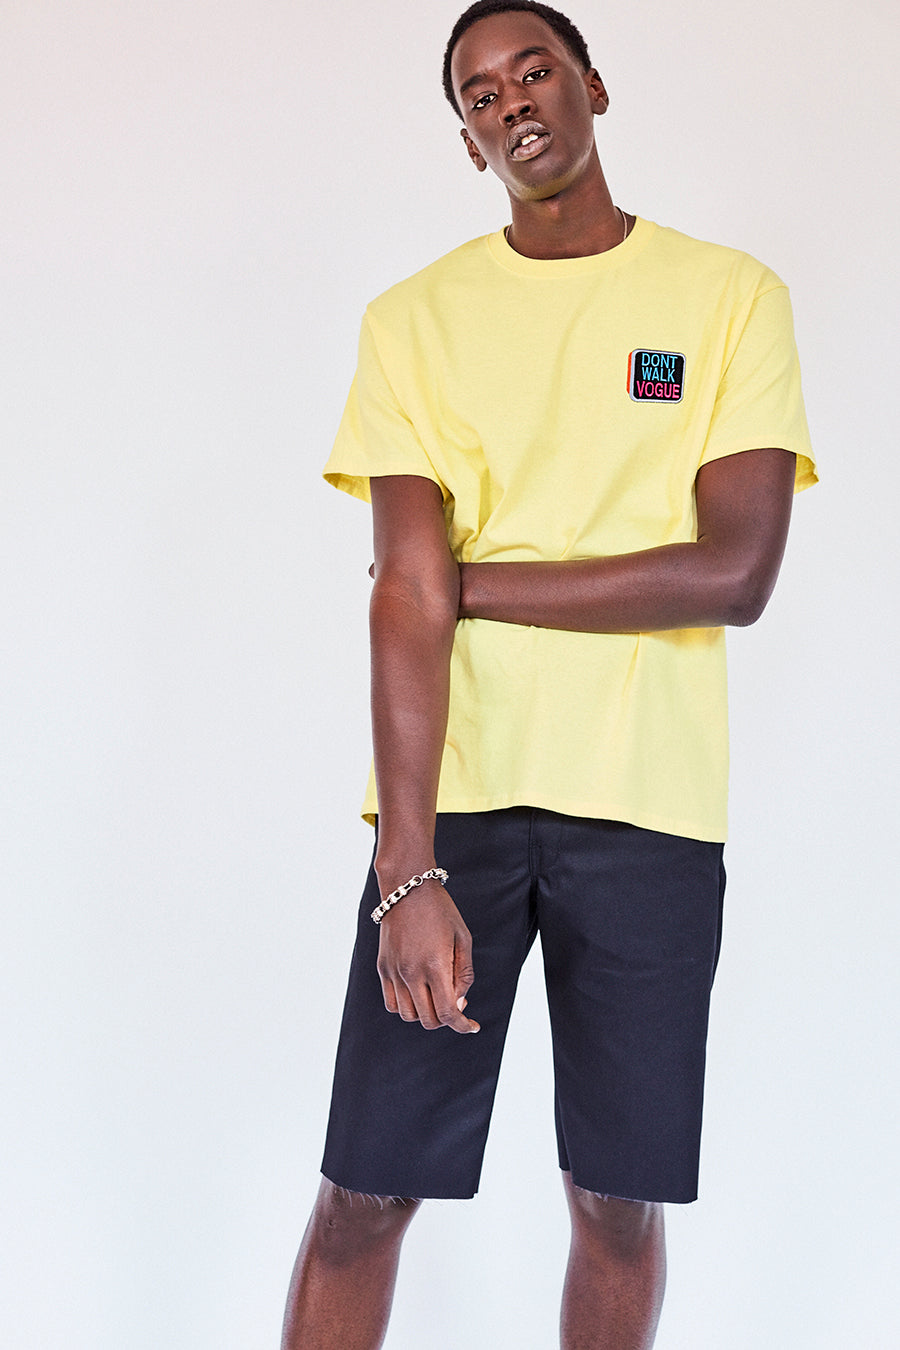 Brand New. Pride Month 2020- New York Label: Your new work from home outfit Shop the Dont Walk Vogue pale yellow T-Shirt featuring chest embroidery inspired by old school Walk/Dont Walk crosswalk signs on the front and St. Marks Couture New York logo on the back. Hand silkscreen printed in New York with love.